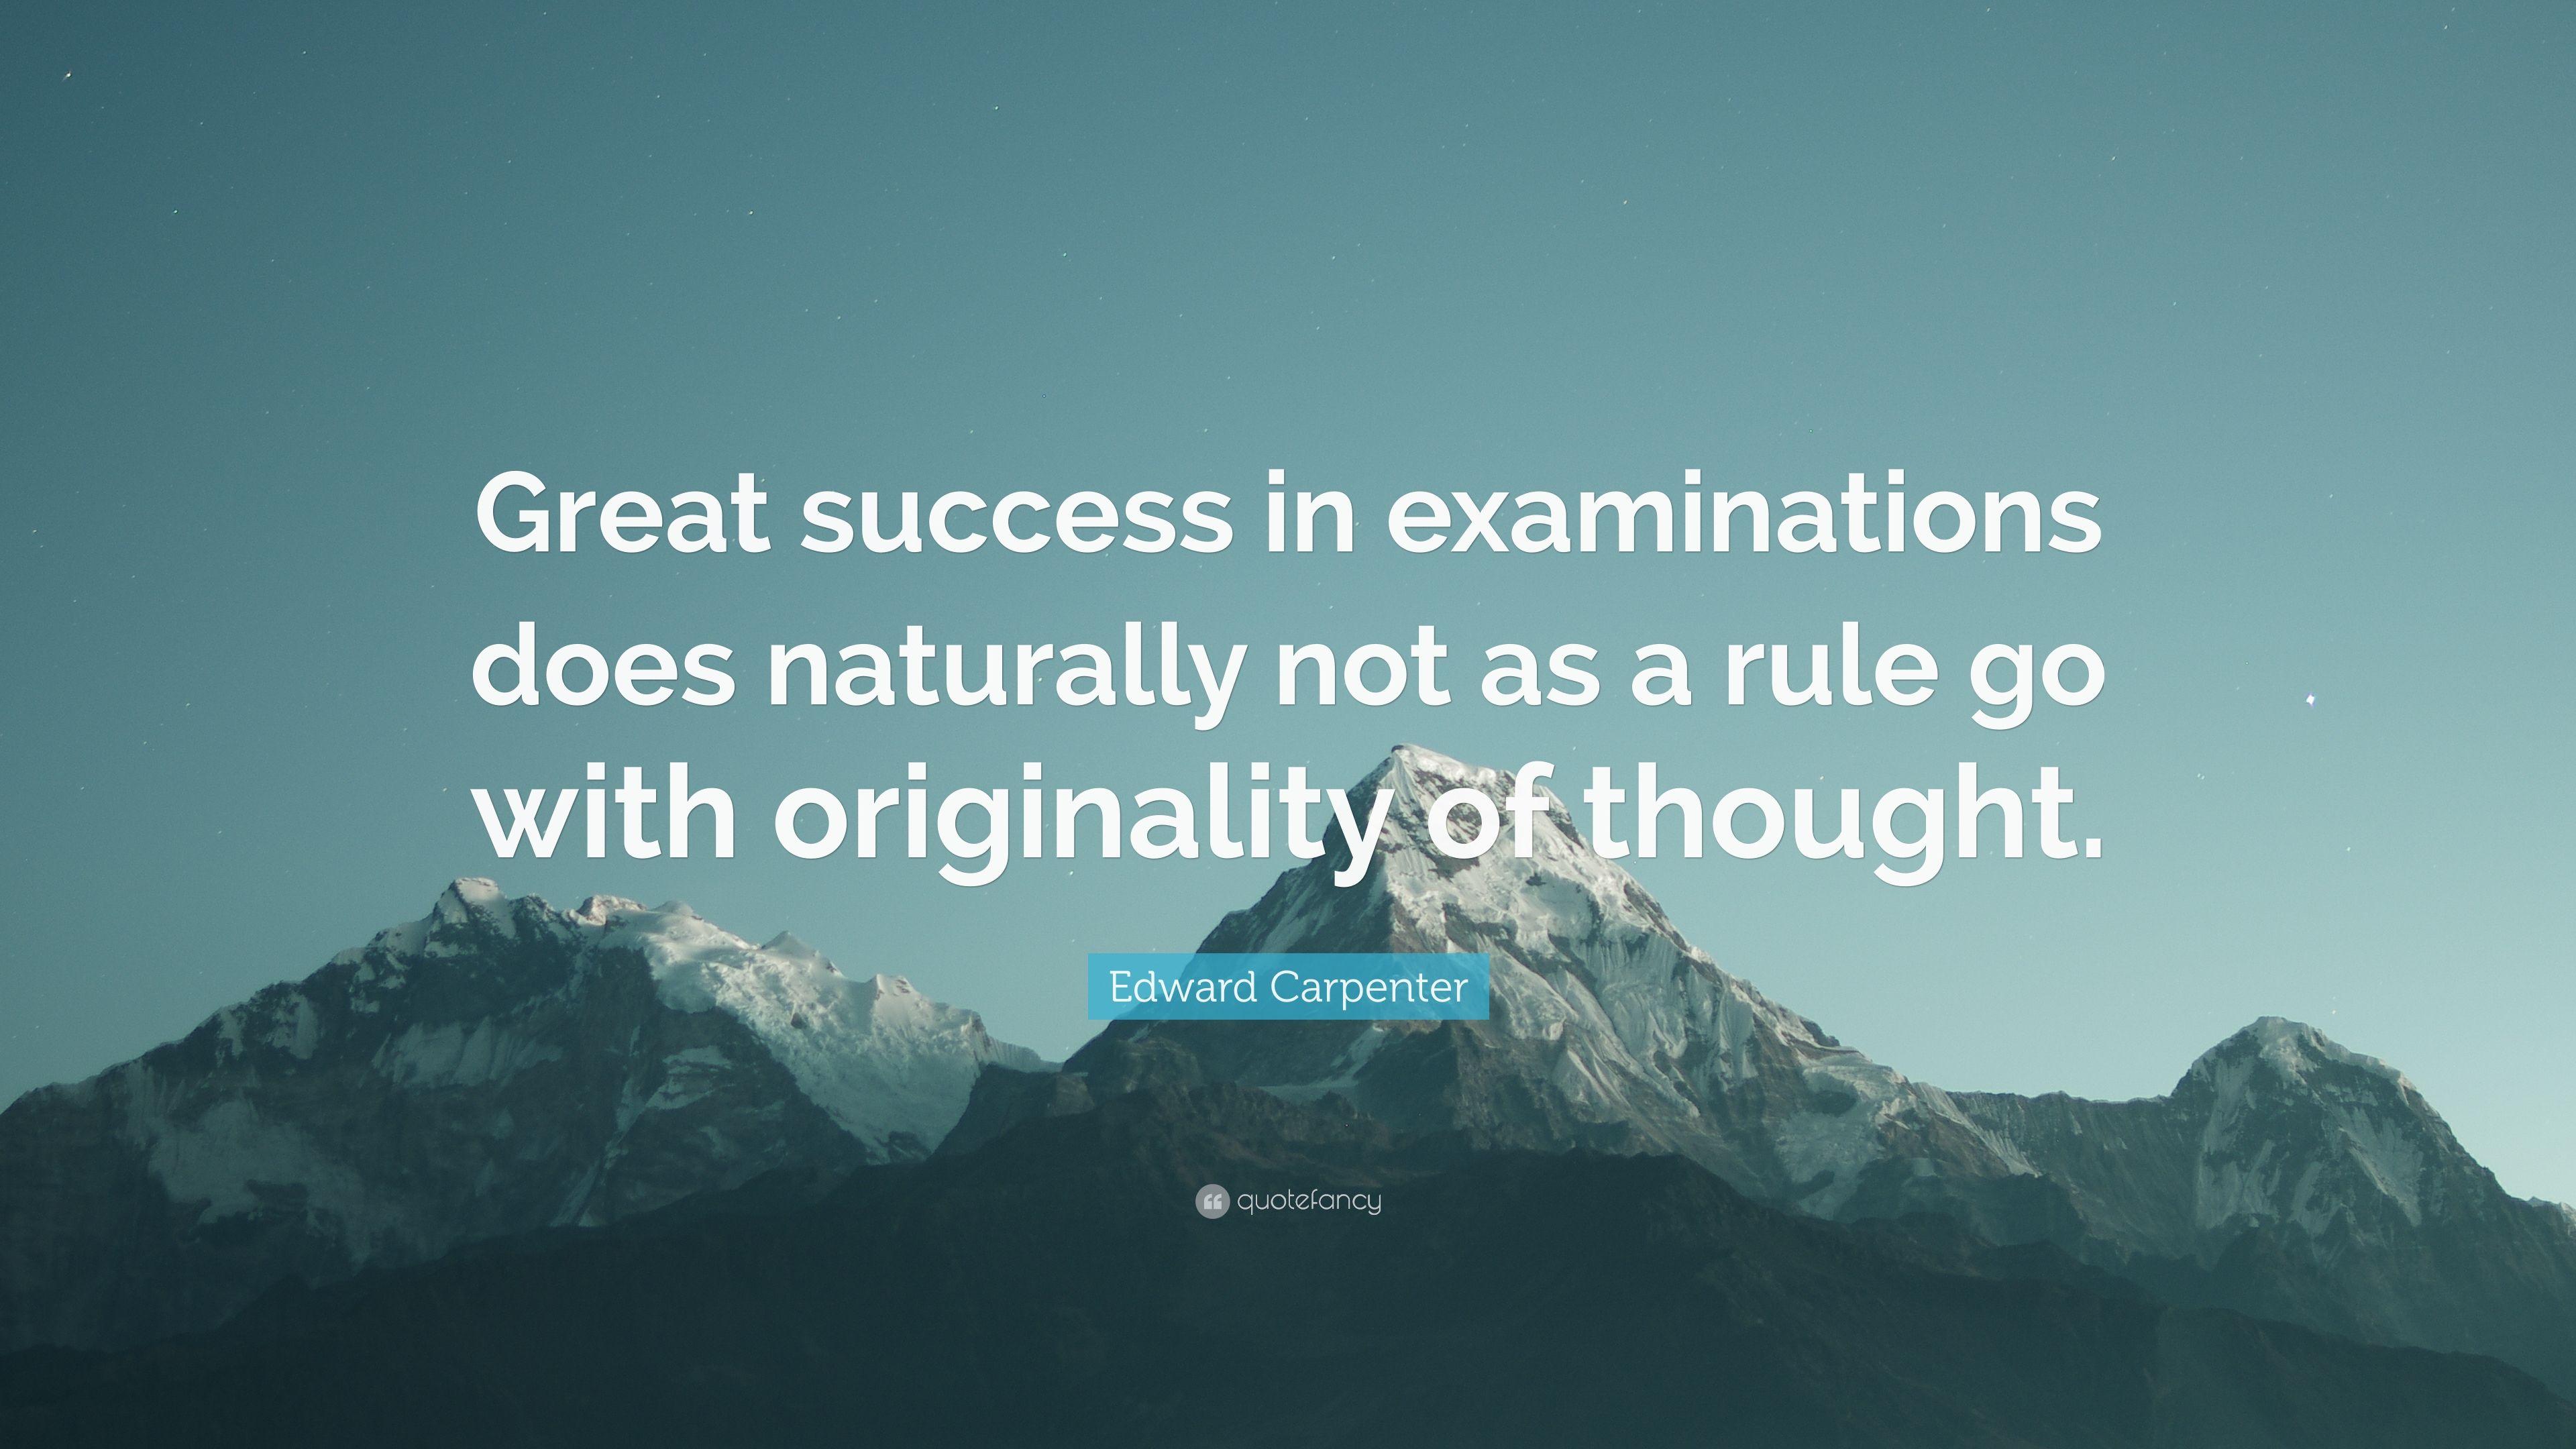 Edward Carpenter Quote: “Great success in examinations does